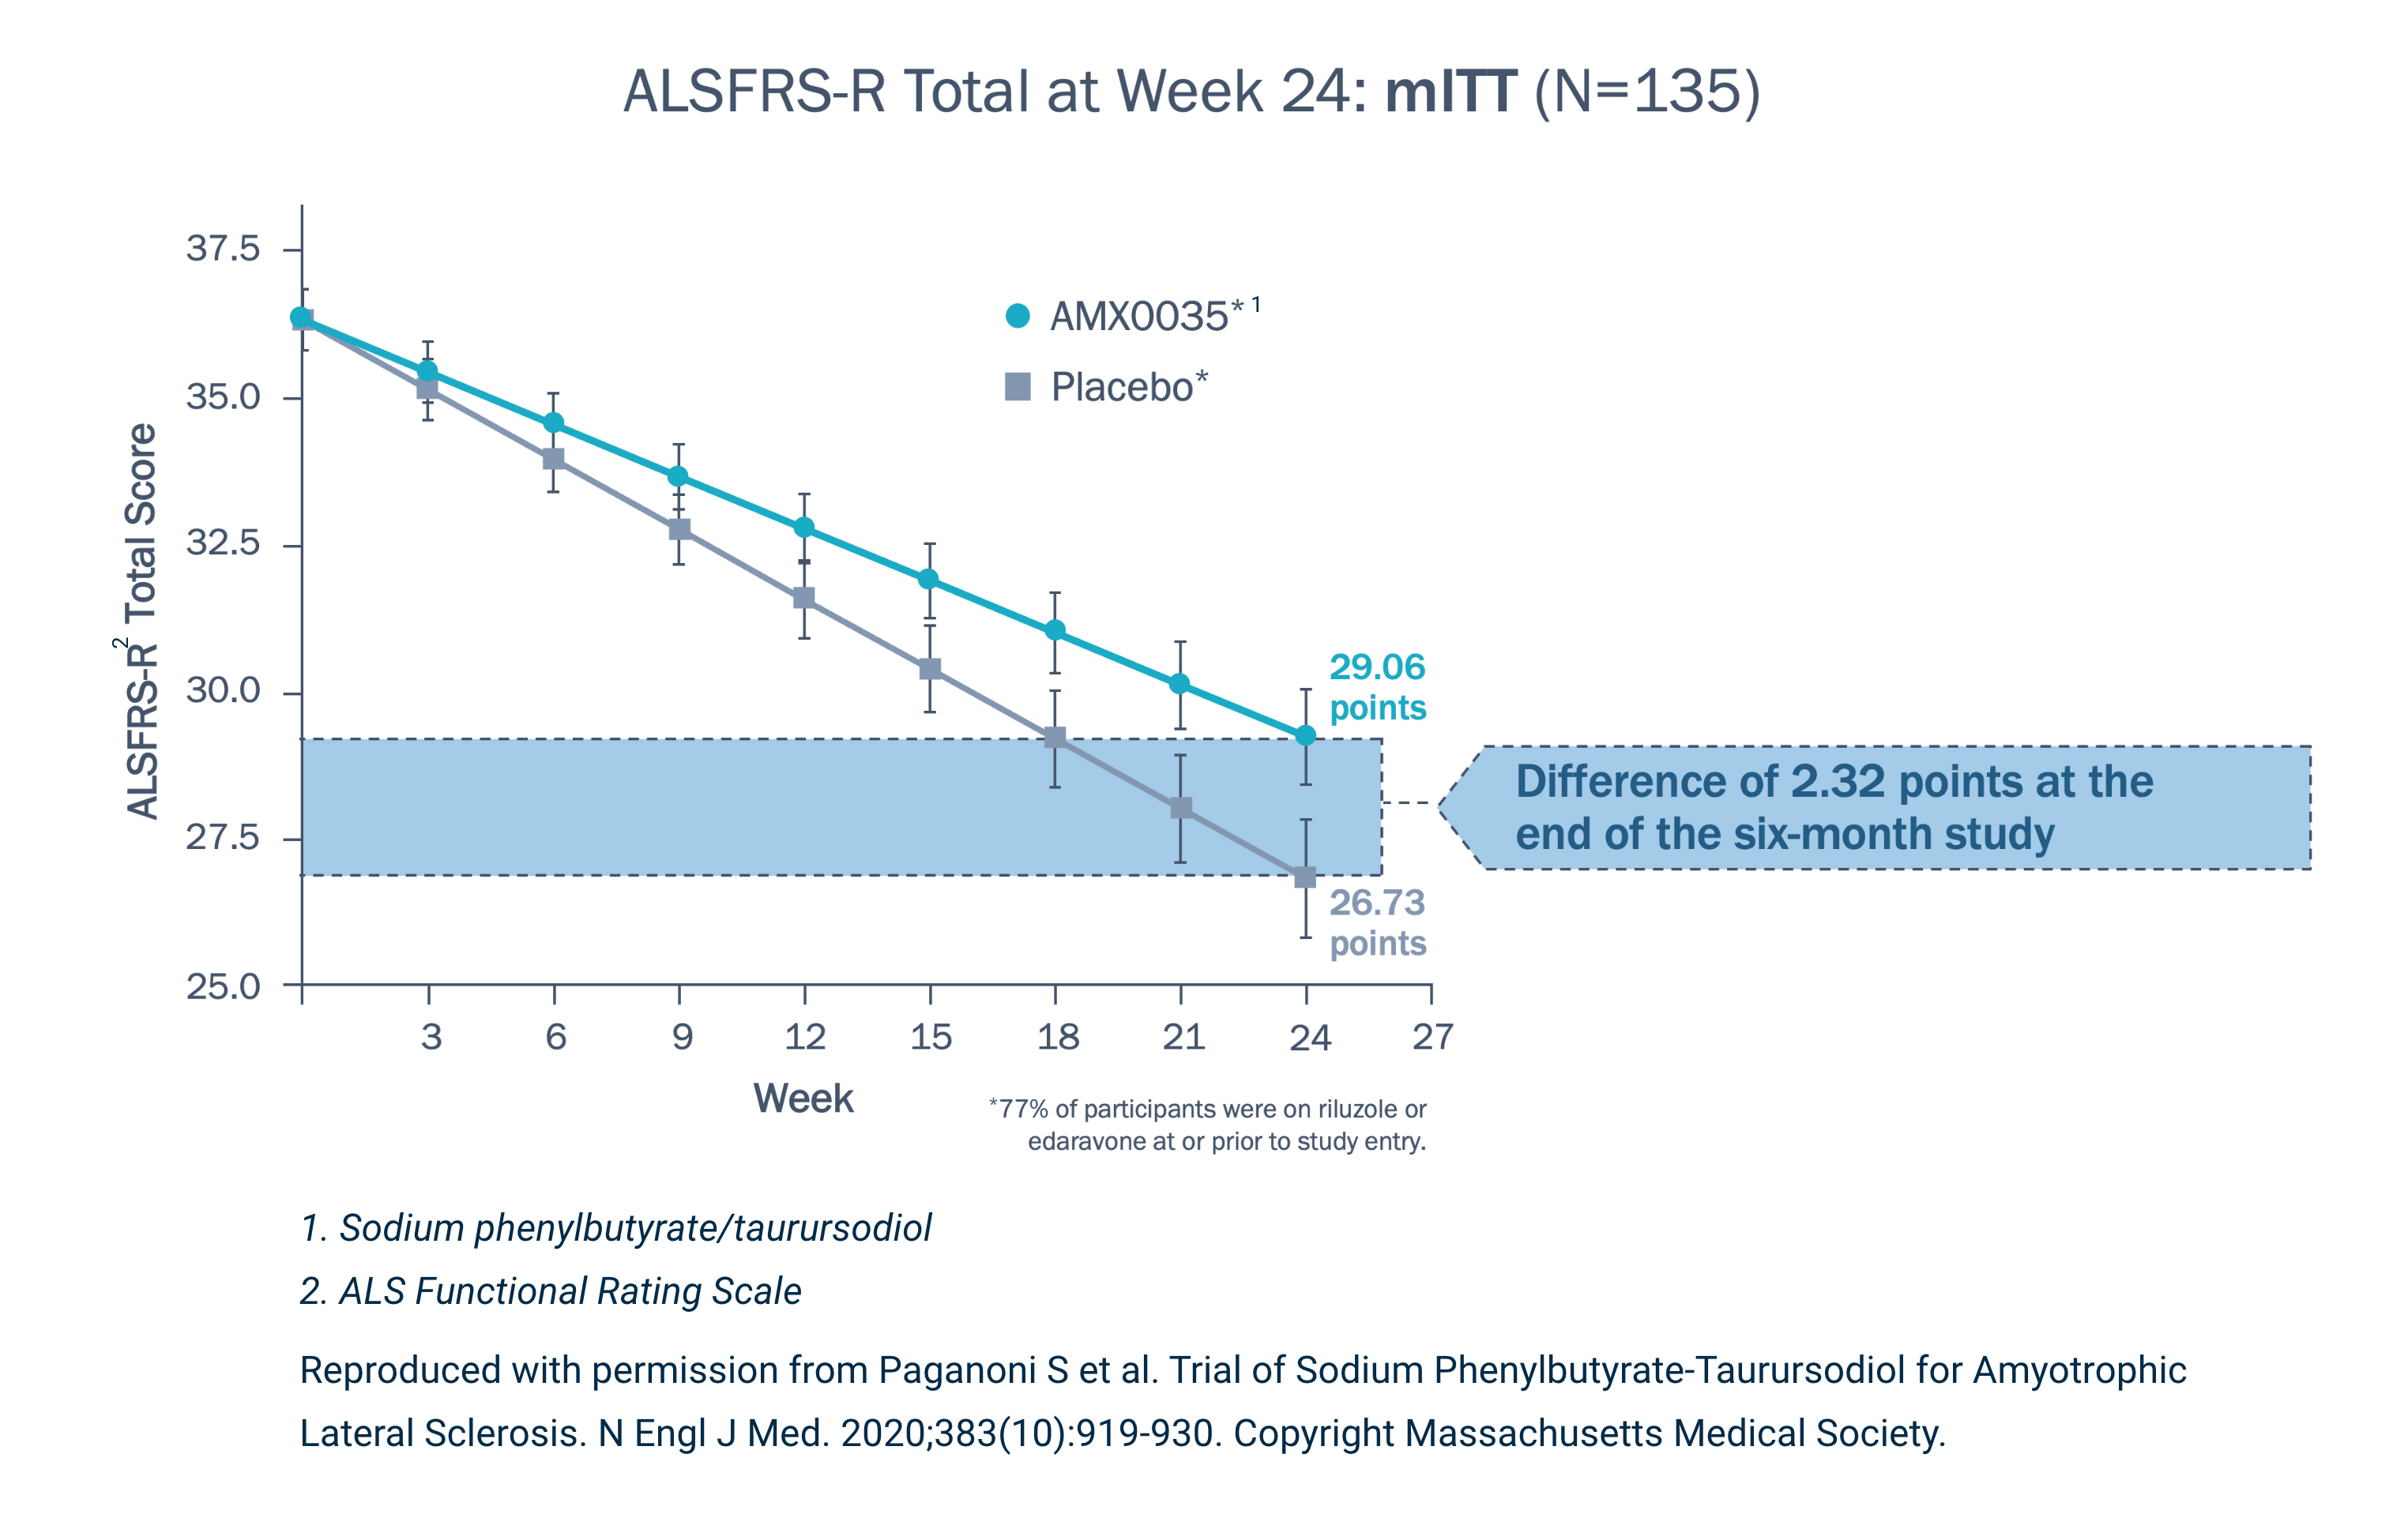 Graph displaying the ALS Functional Rating Scale (ALSFRS-R) total at week 24 in the CENTAUR trial